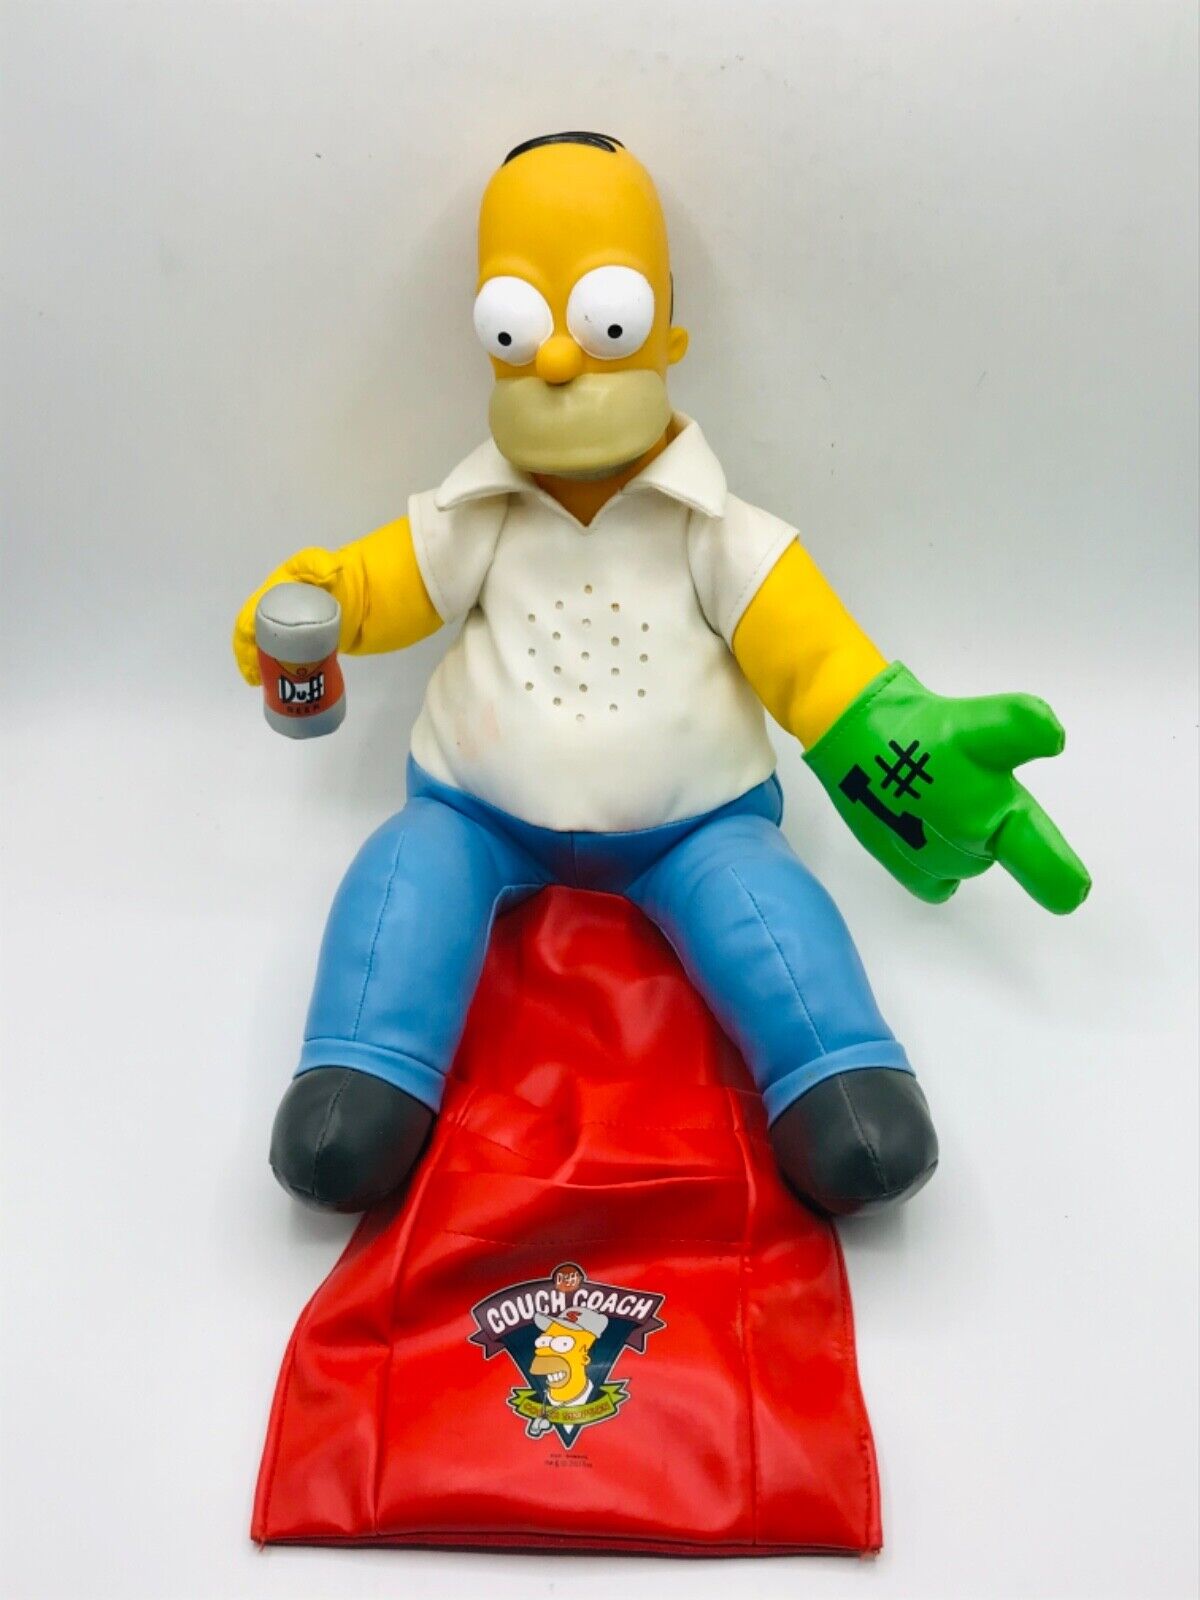 Simpsons Plush Duff Couch Homer Simpson Doll 16\